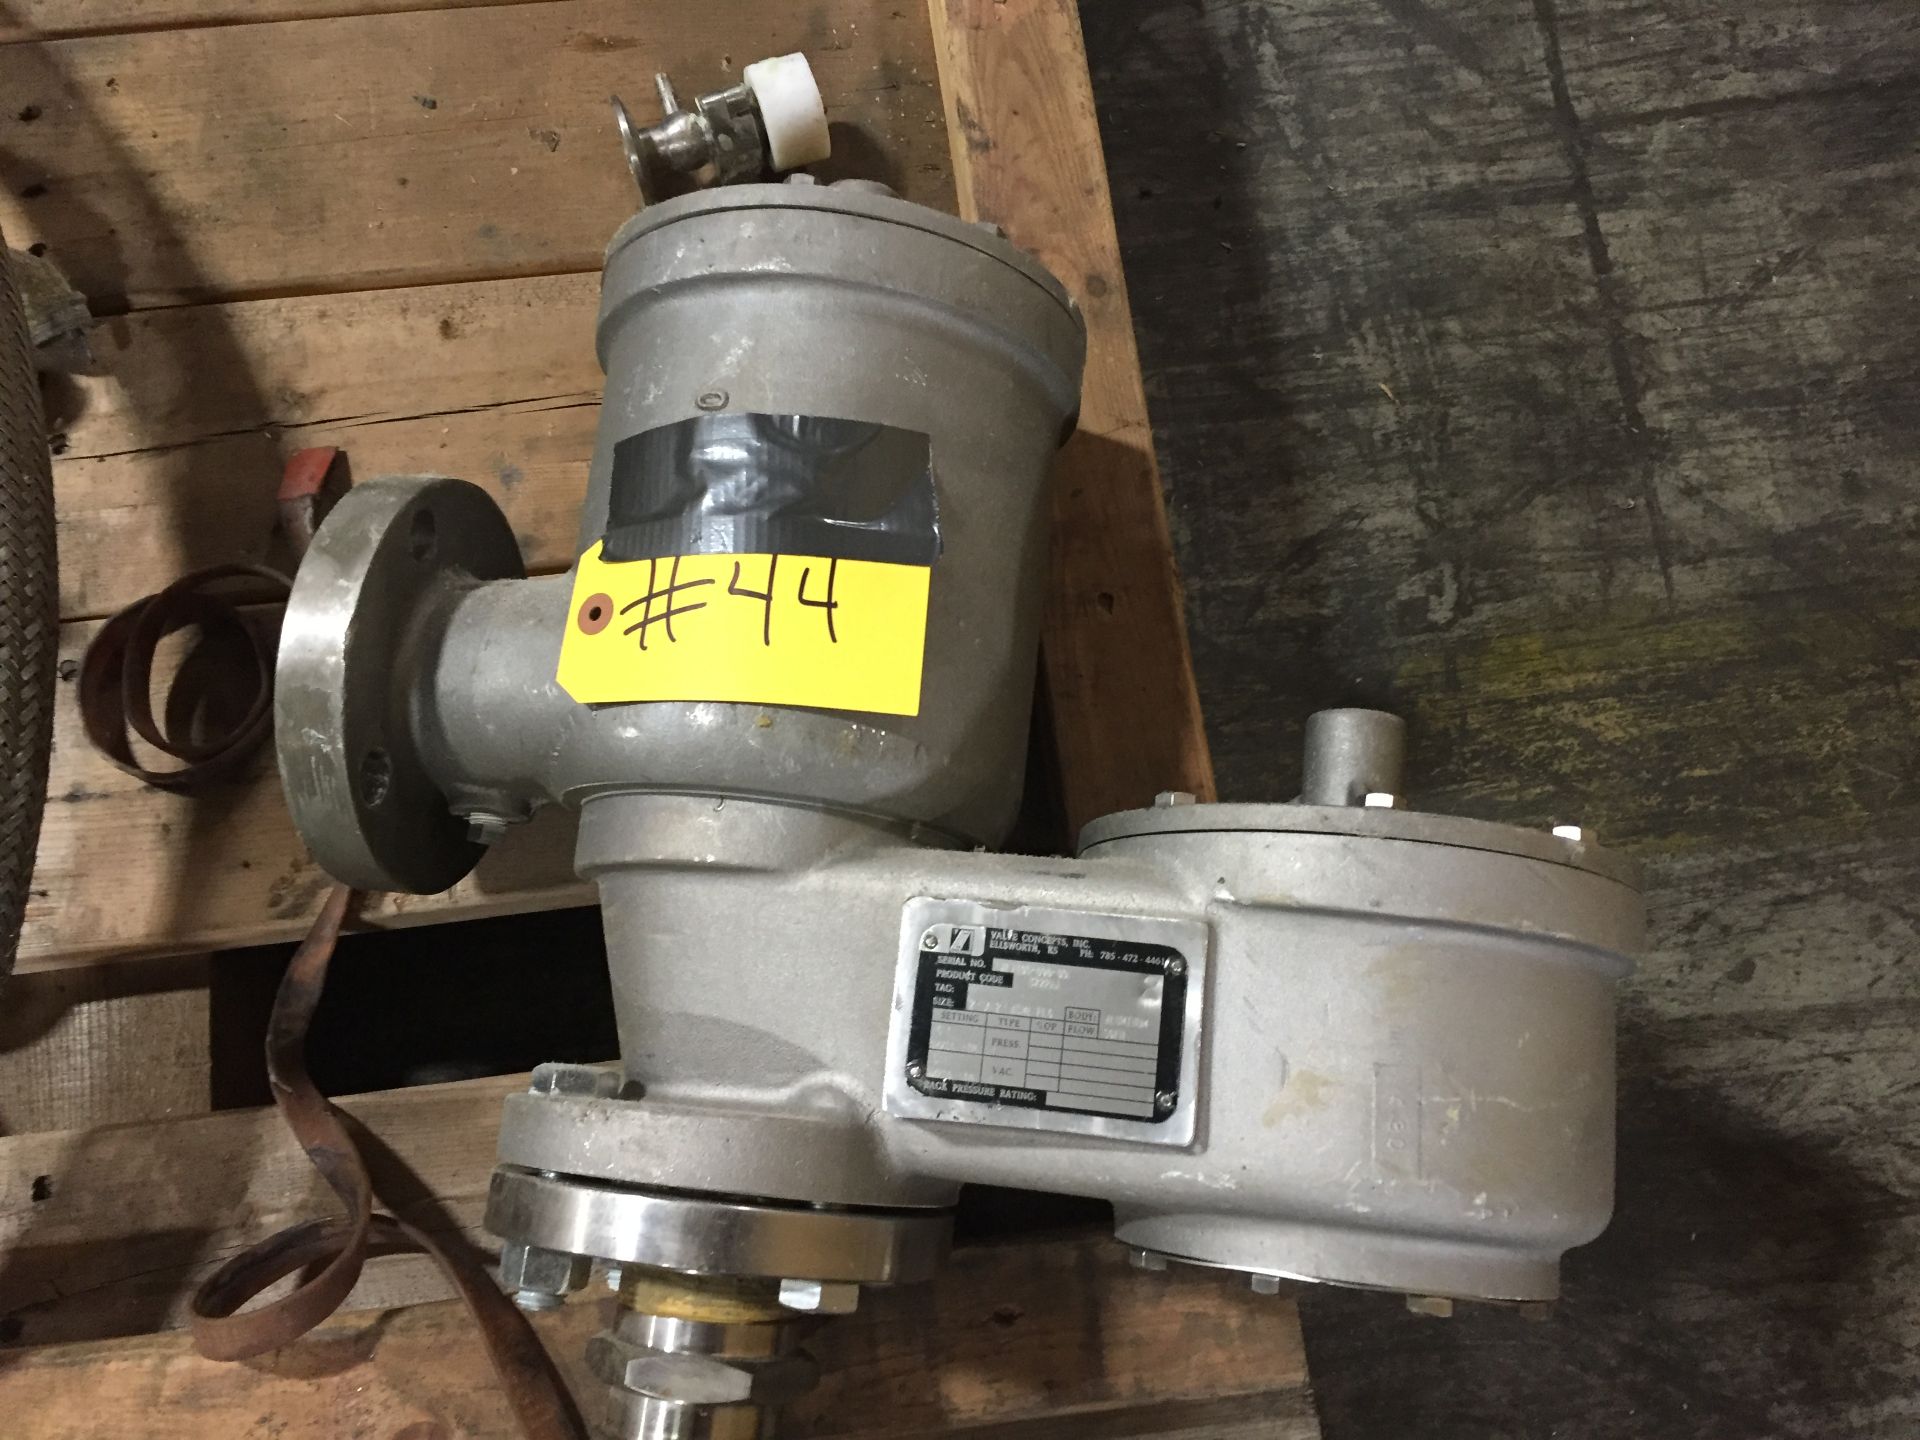 Valve Concepts inc.3222AA,2'x2" ASME FLANGE FLOW SCPH, SN:AE1105-000-09 :equipment located at